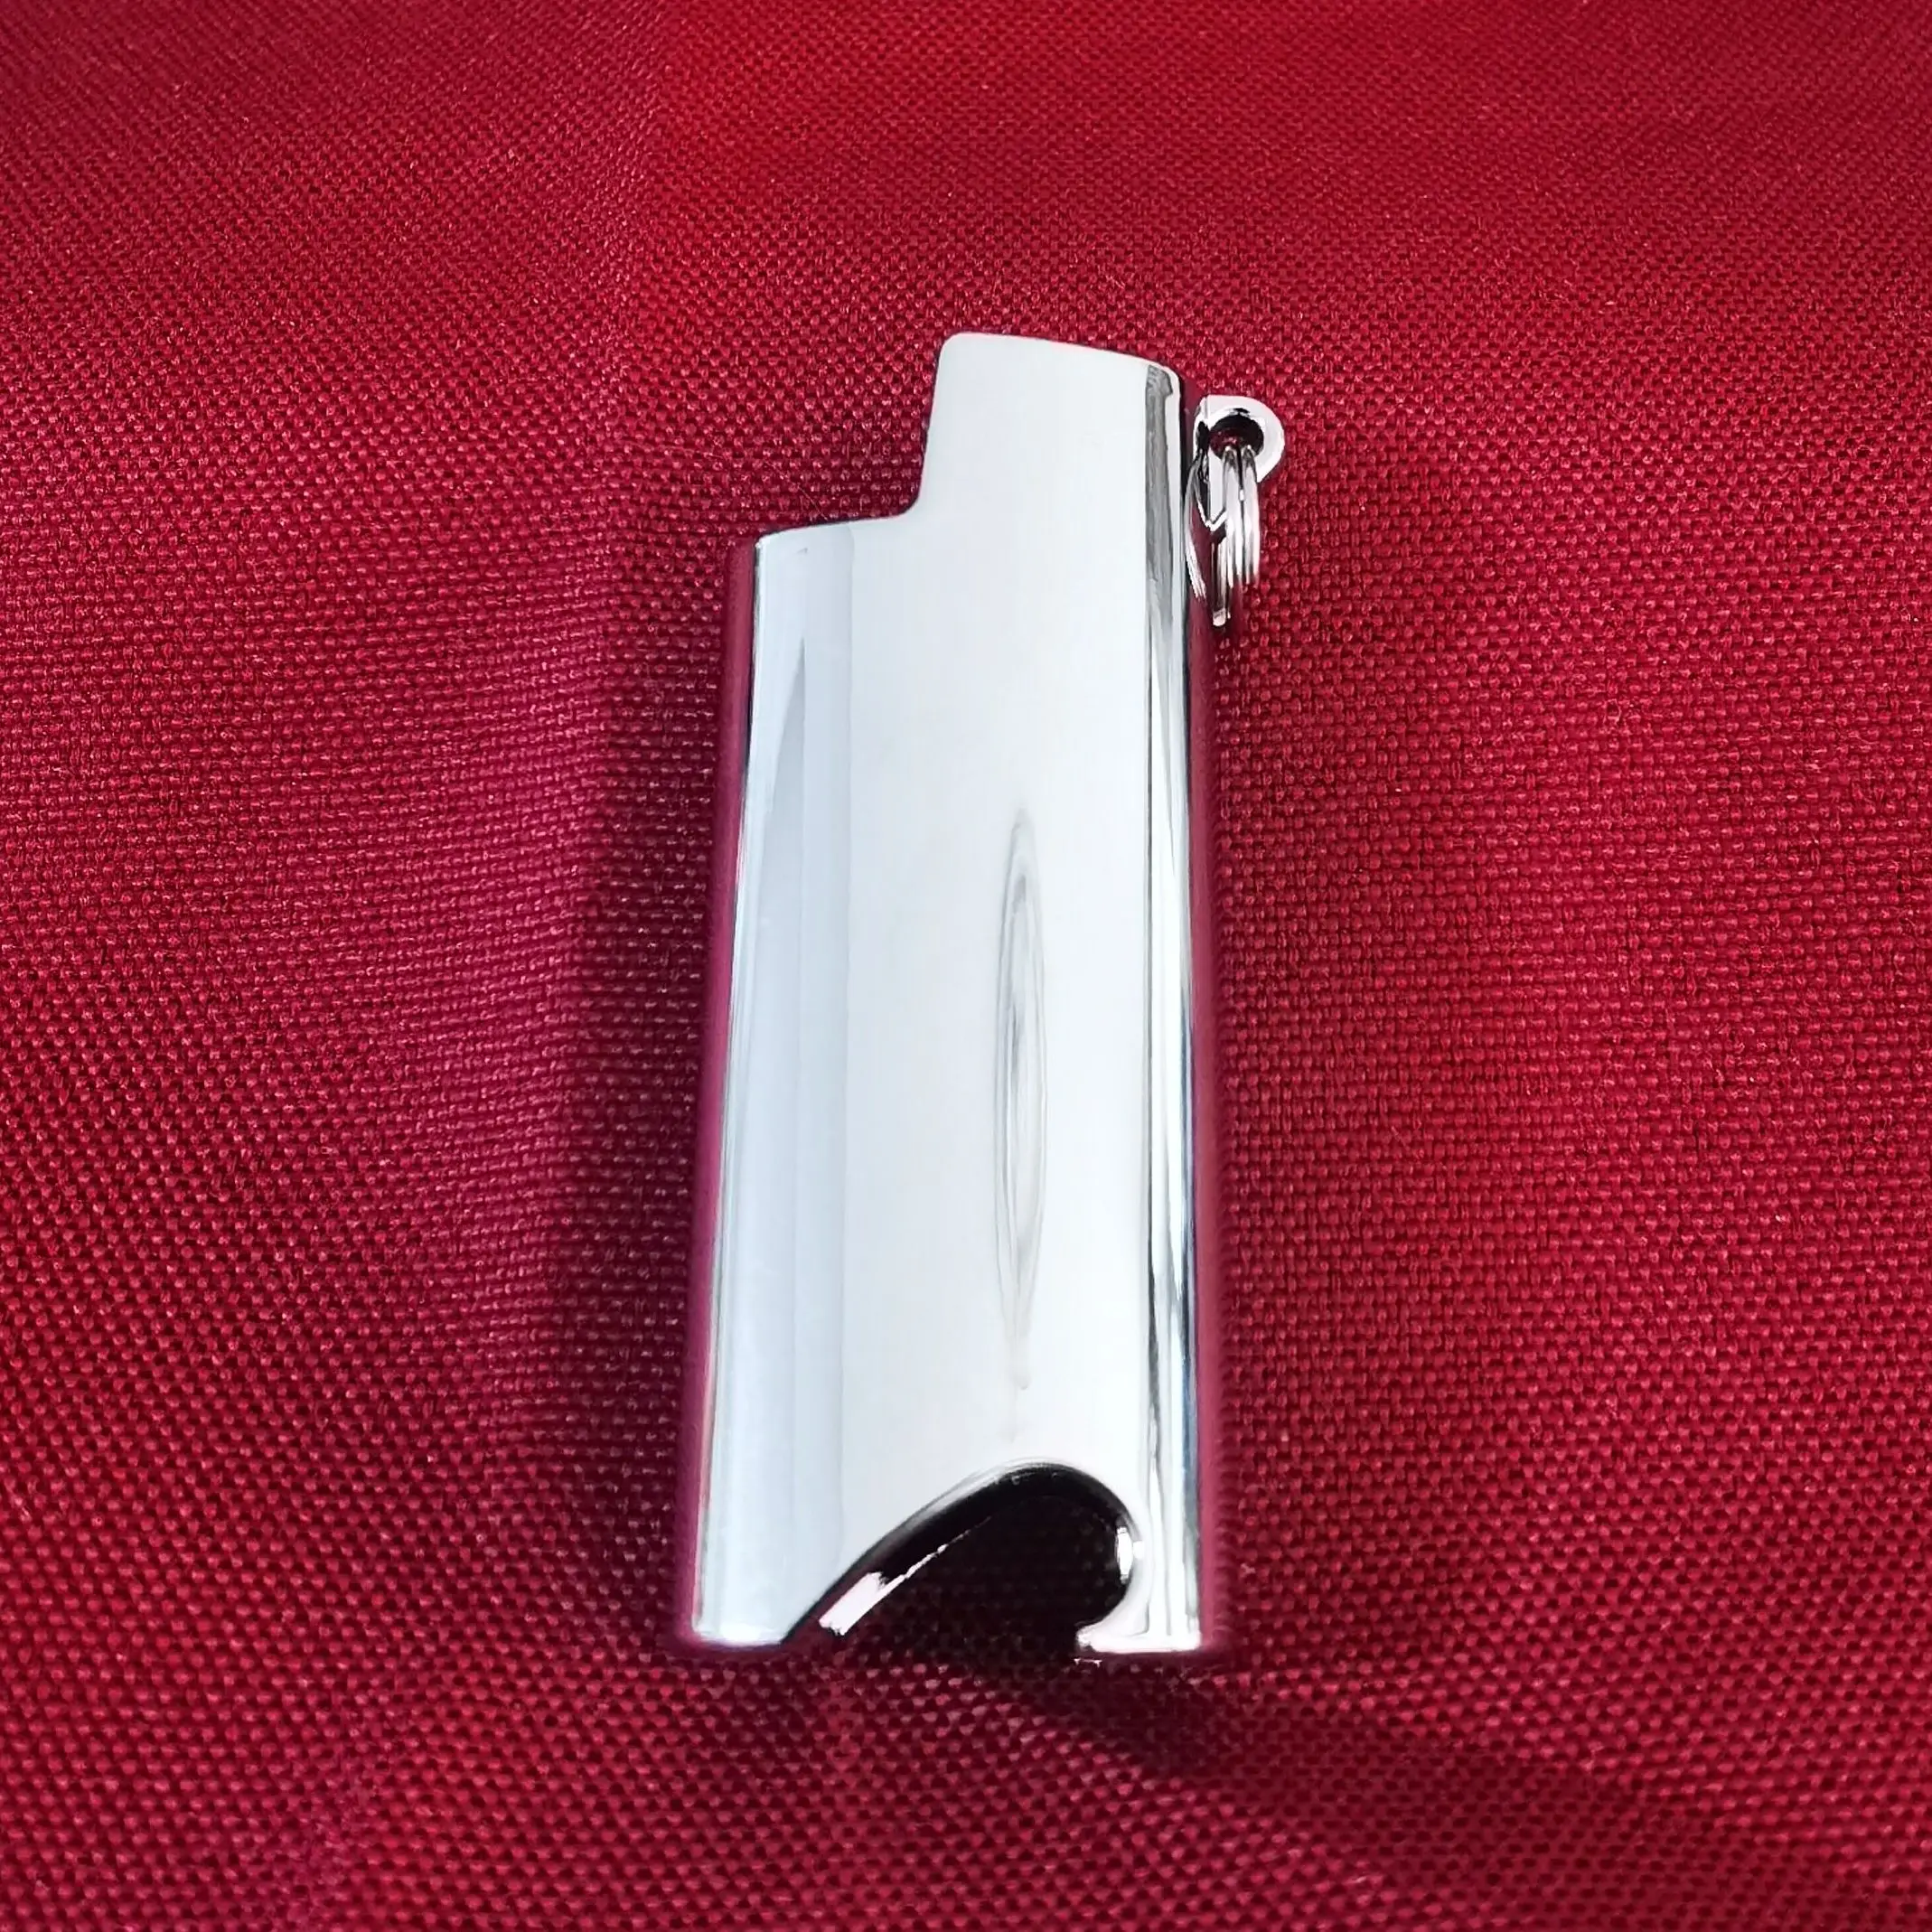 Dolphin Alloy Metal Disposable Lighter Case Cover For For Bic